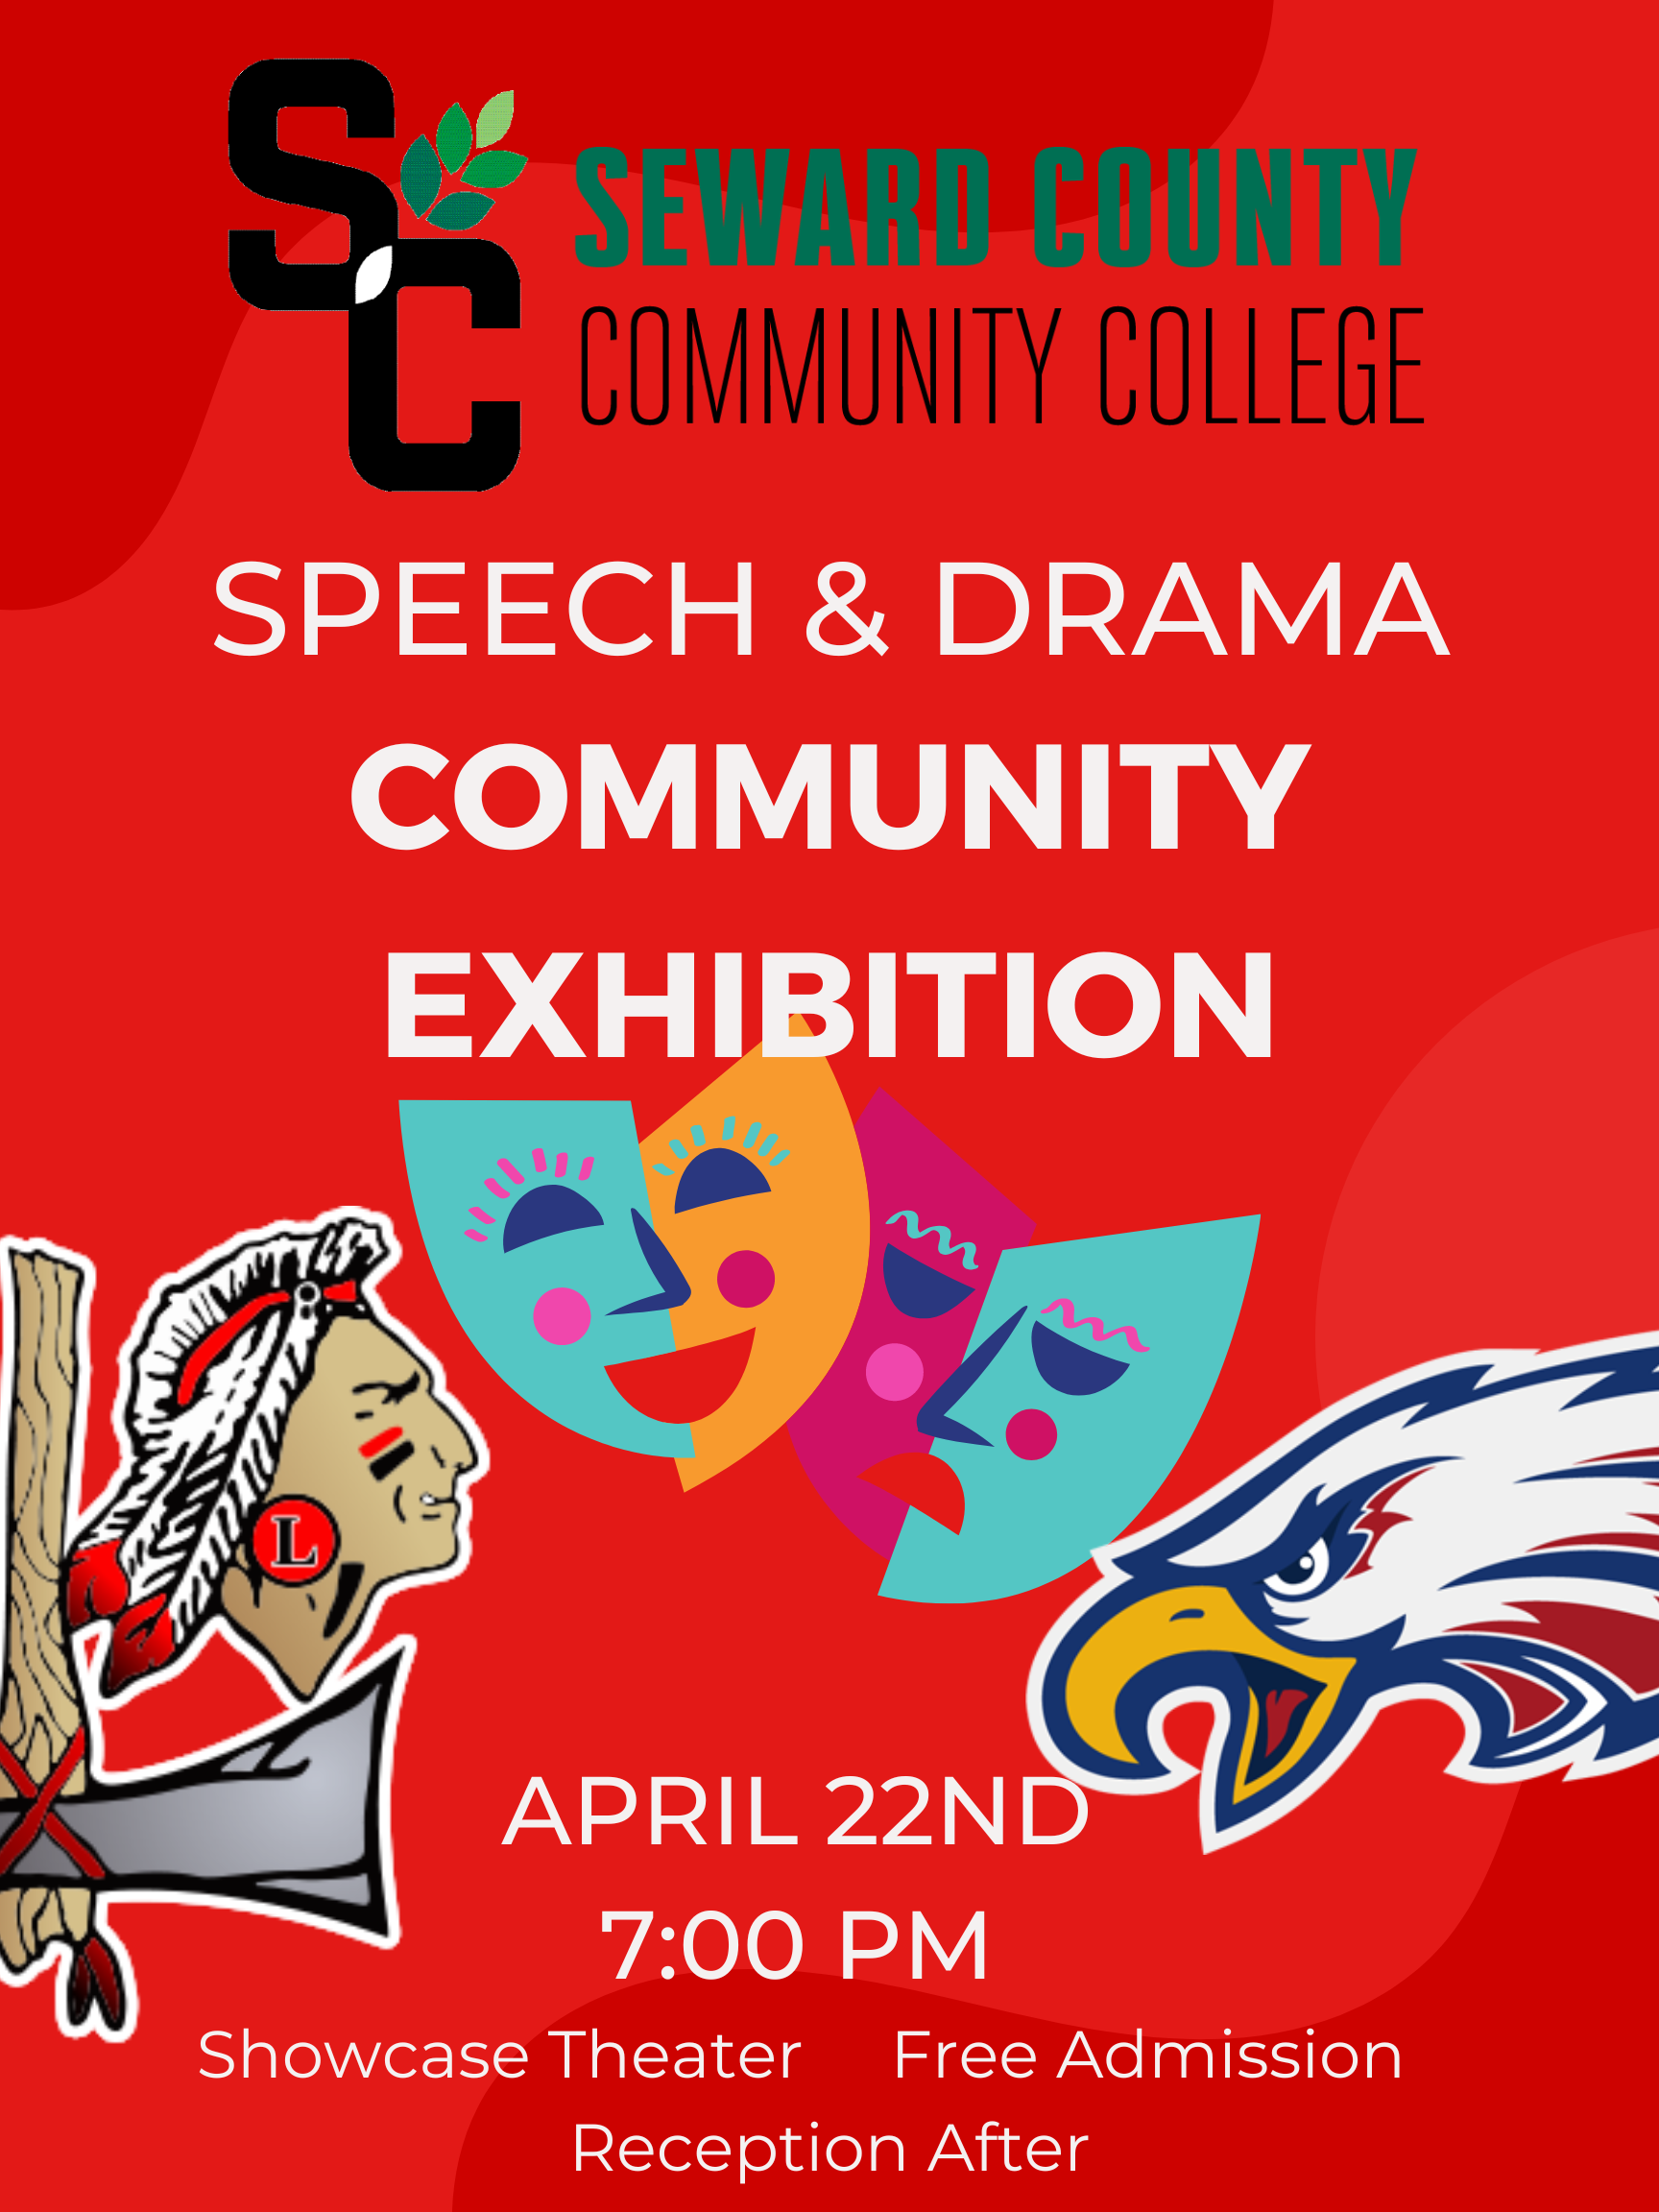 Speech and Debate Exhibition on Saturday at SCCC